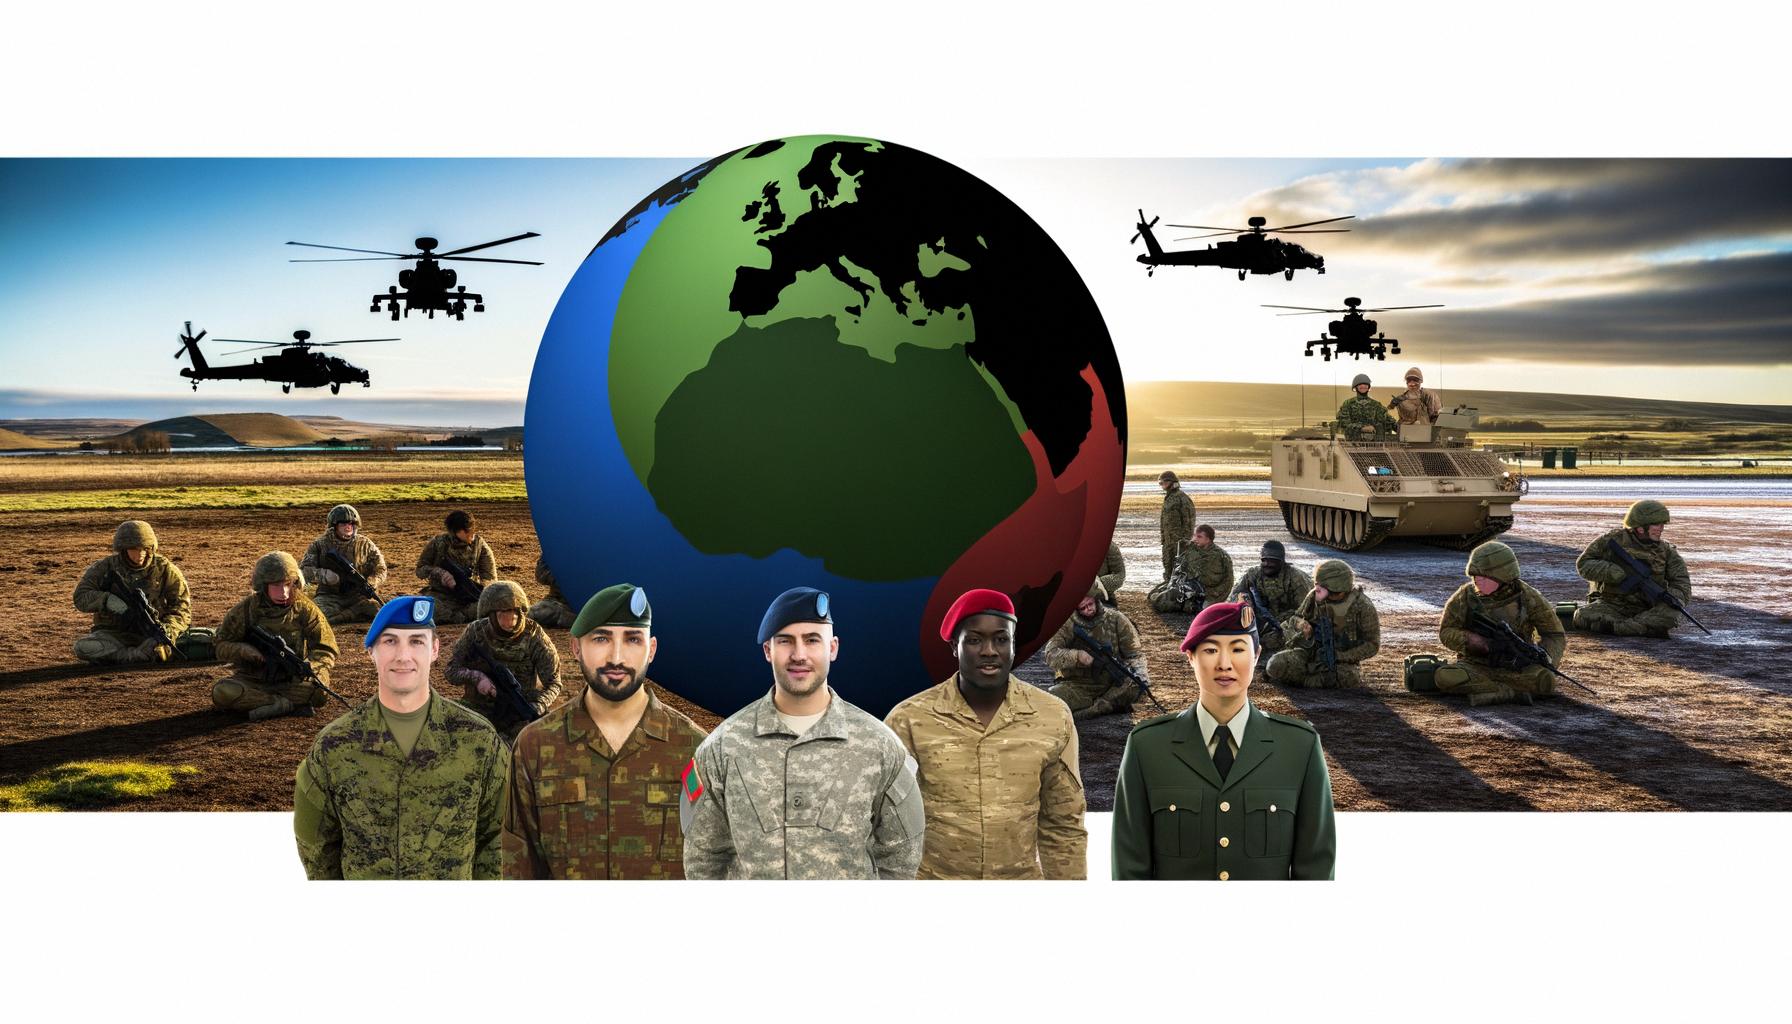 Global military focuses on readiness and partnerships, spanning training to health initiatives.